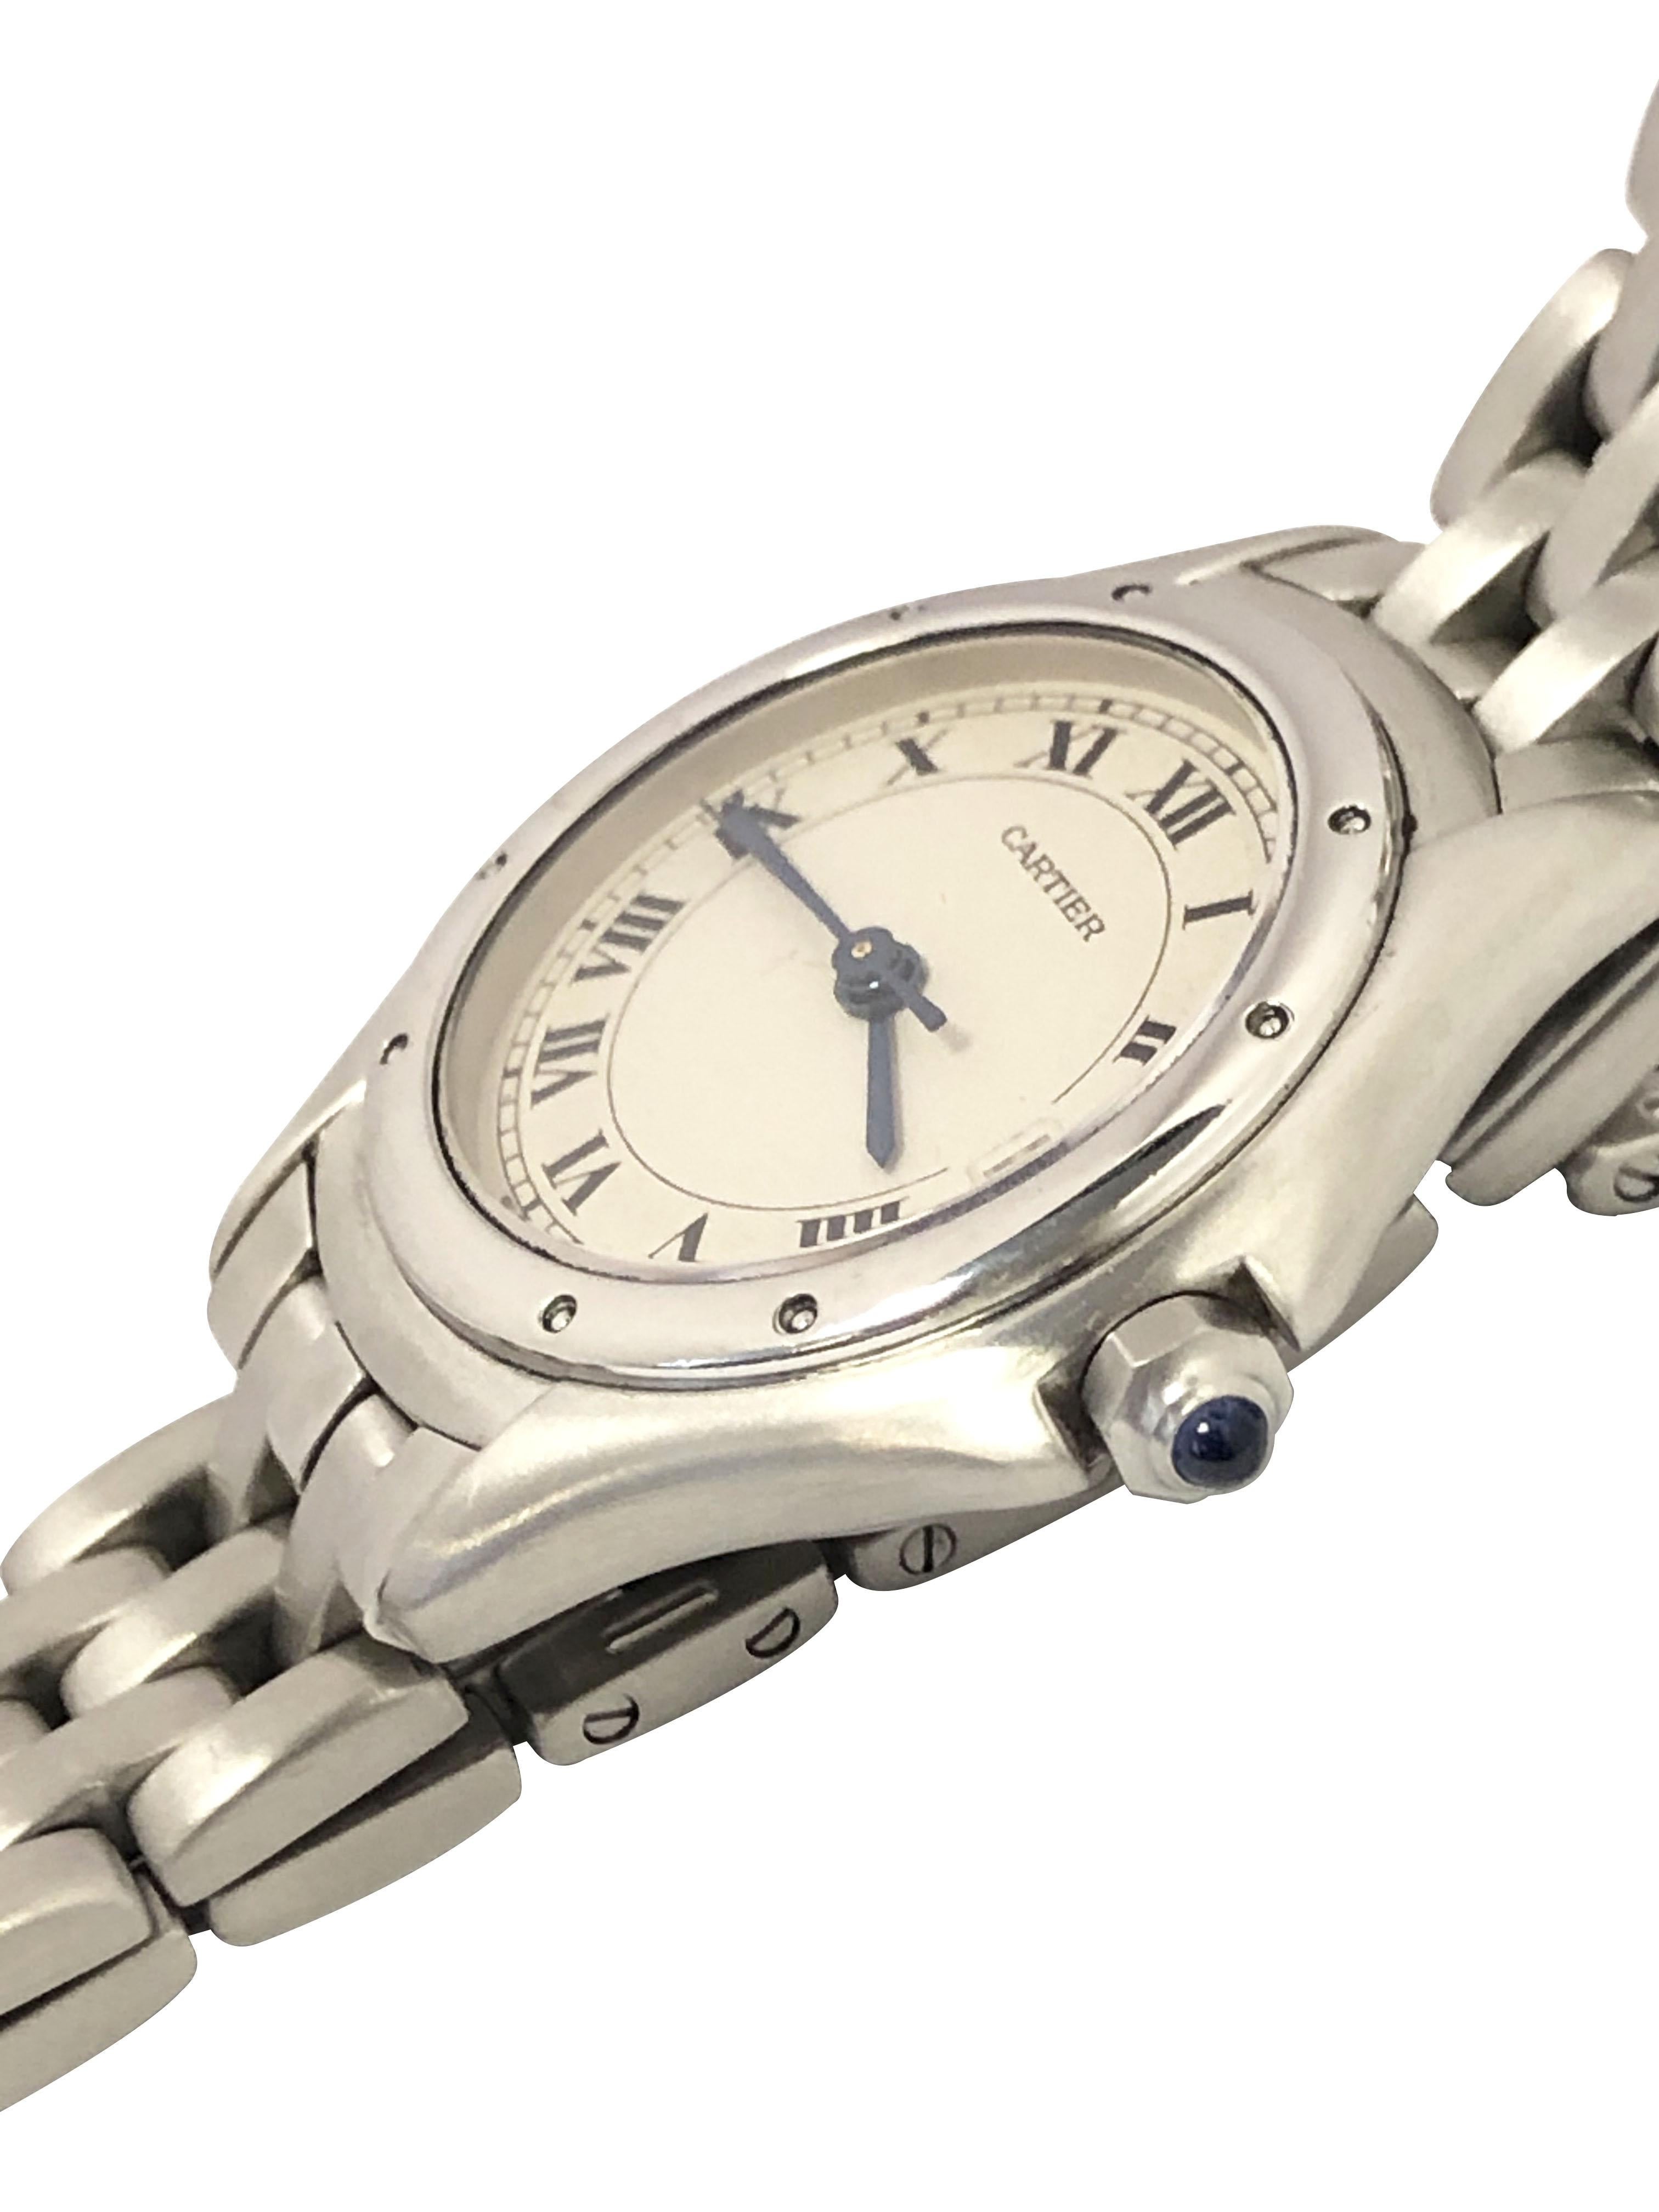 Circa 1990s Cartier Classic Ladies Cougar Wrist watch, 26 MM Stainless Steel case, quartz Movement, White Dial with Black roman Numerals, sweep seconds hand, Calendar window at the 3 position and a sapphire Crown. 1/2 inch wide Stainless Steel link